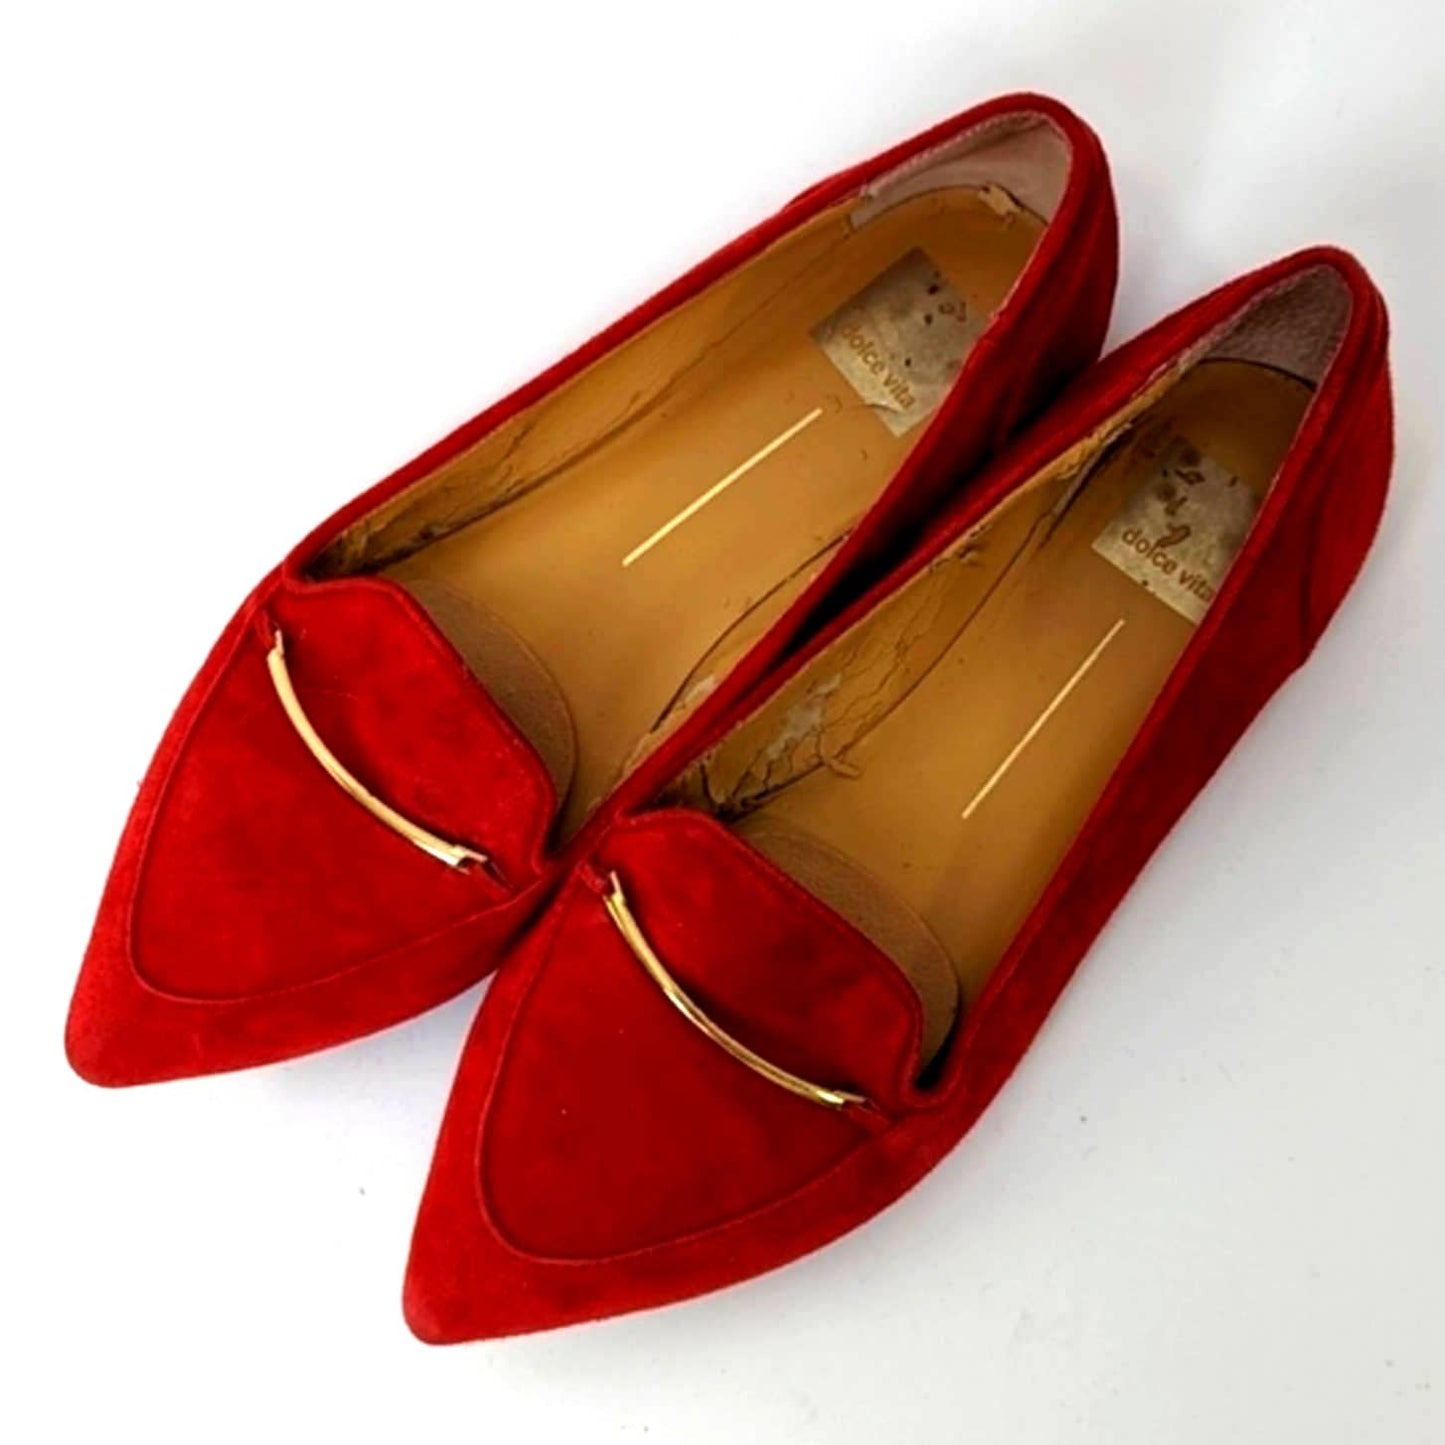 Dolce Vita Red Point Toe Sued Ballet Flats - 7